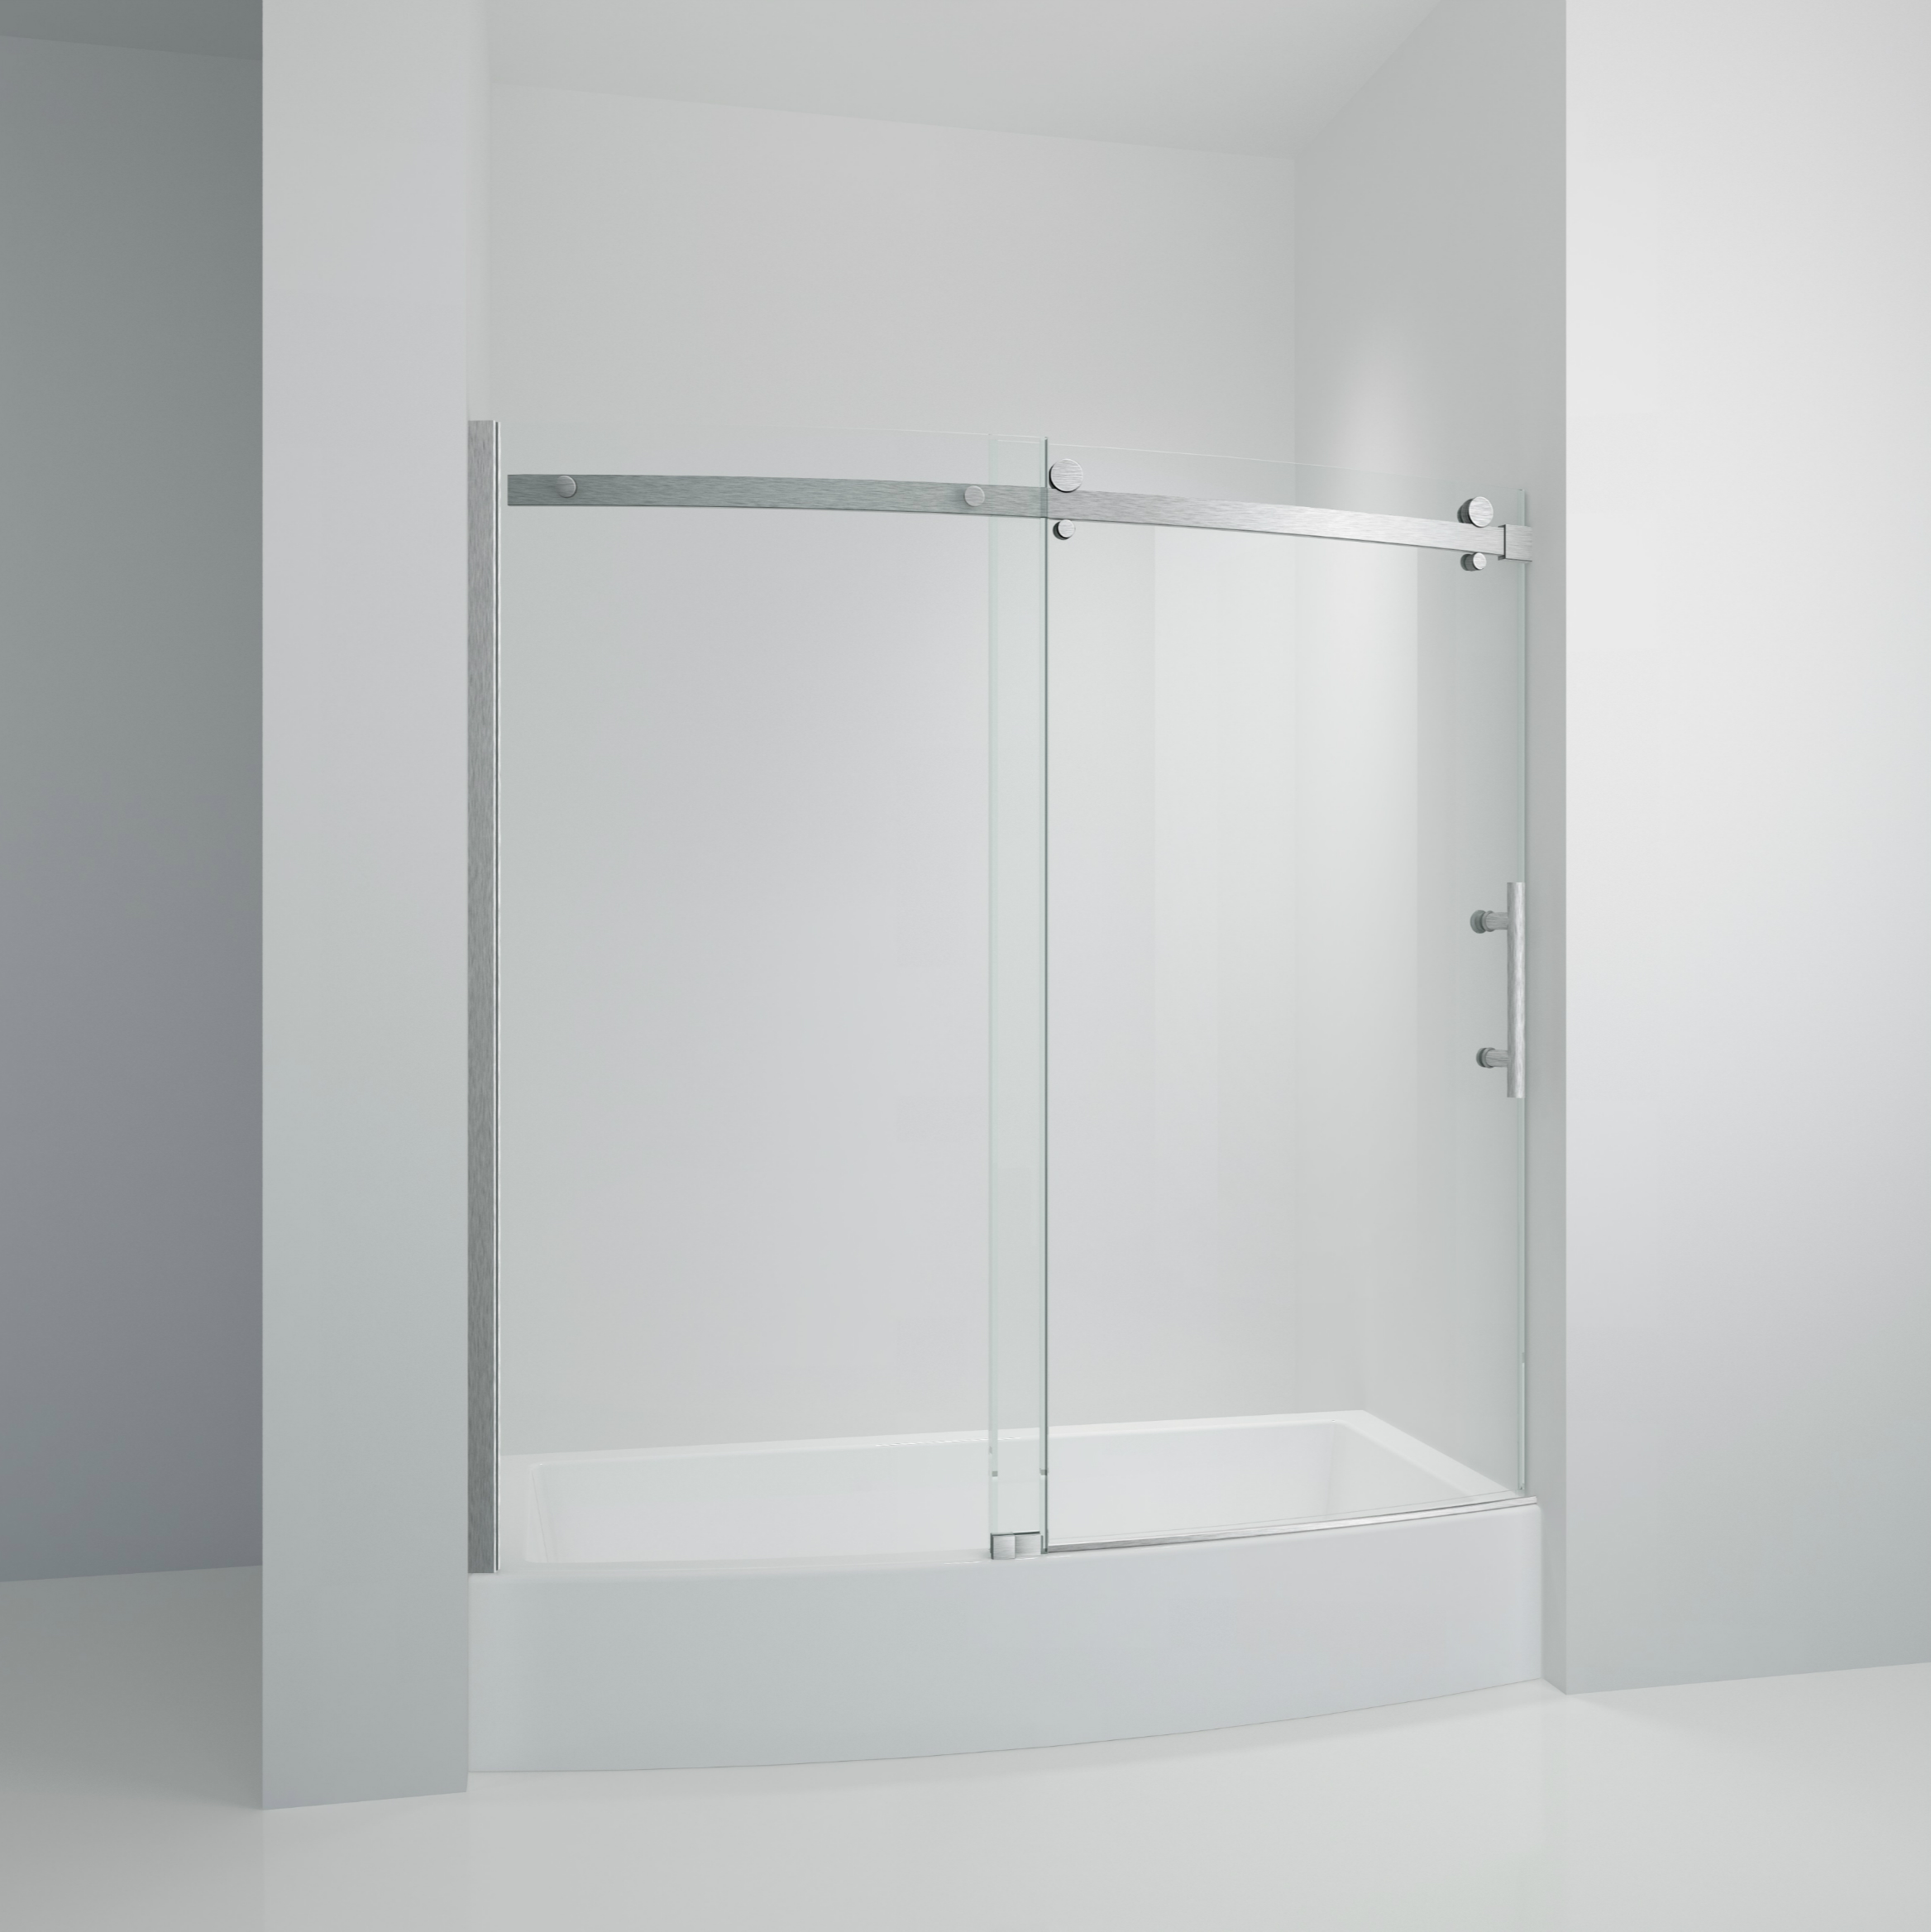 TRUSTMADE 48 in. H x 34 in. W x 76 in. H Semi-Frameless Square Sliding Shower Enclosure (cUPC Approved), w/ Invisible Rollers-CASAINC